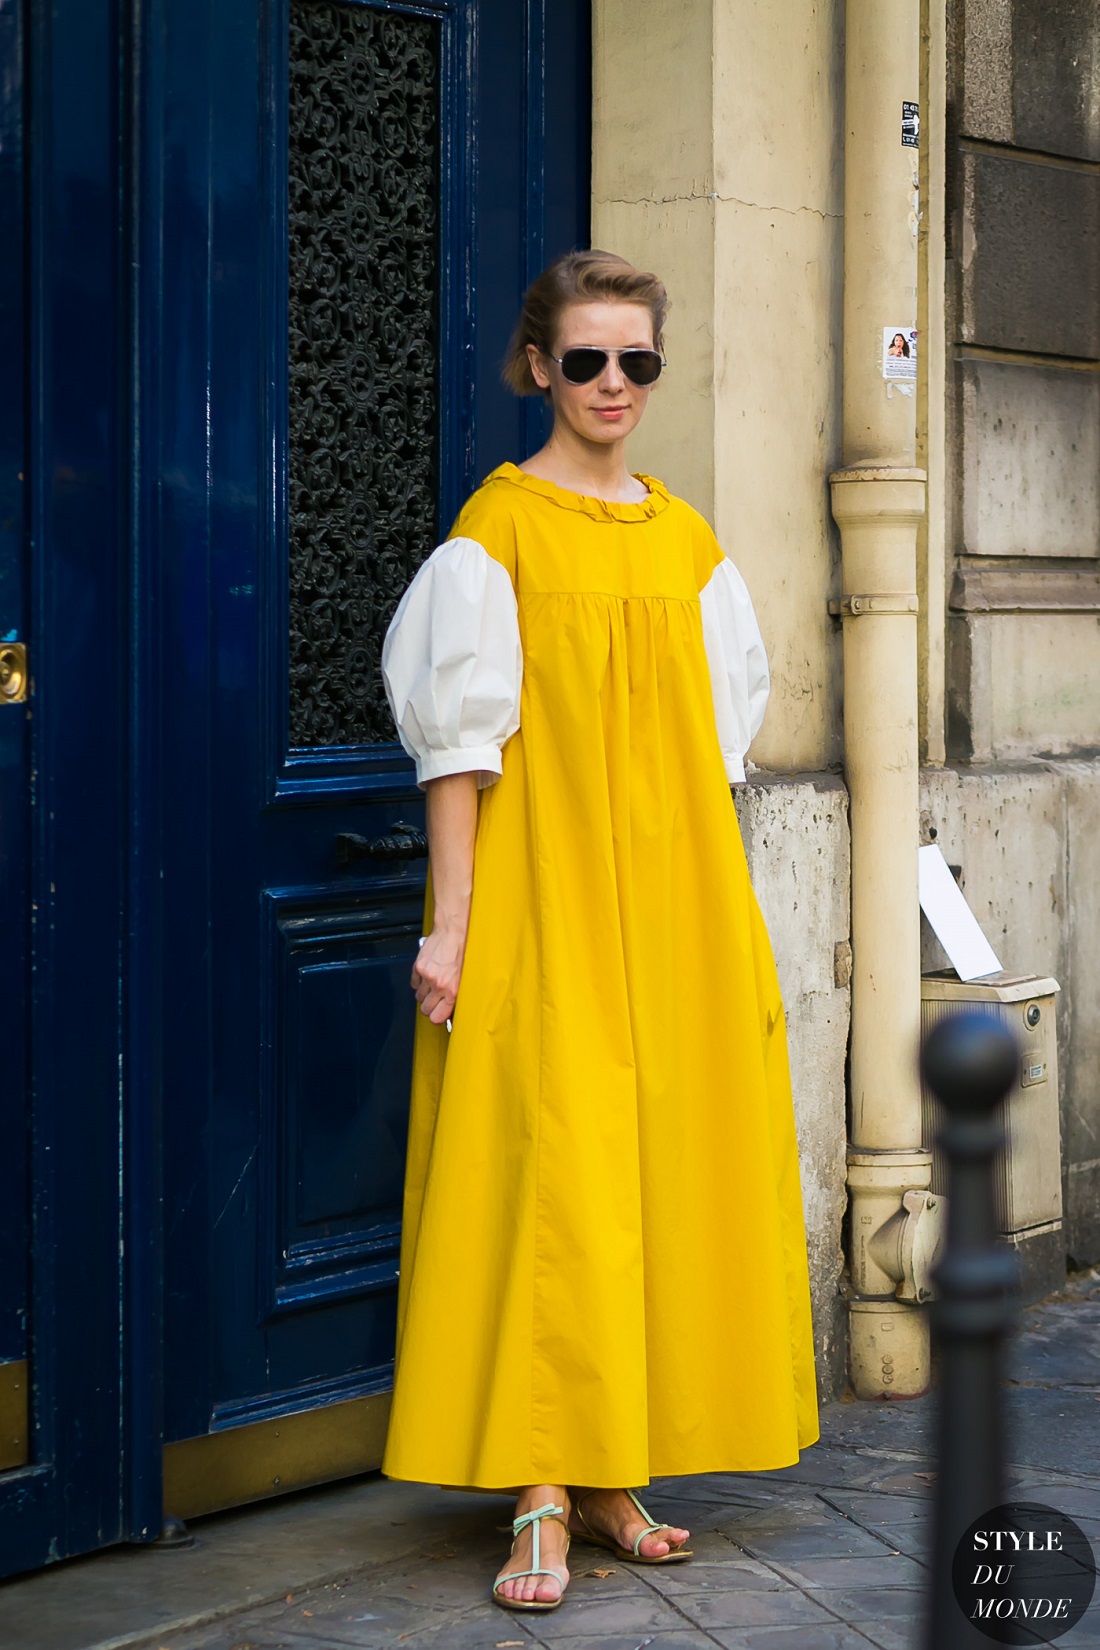 @projectfairytale: 15 Yellow outfits to transition into fall